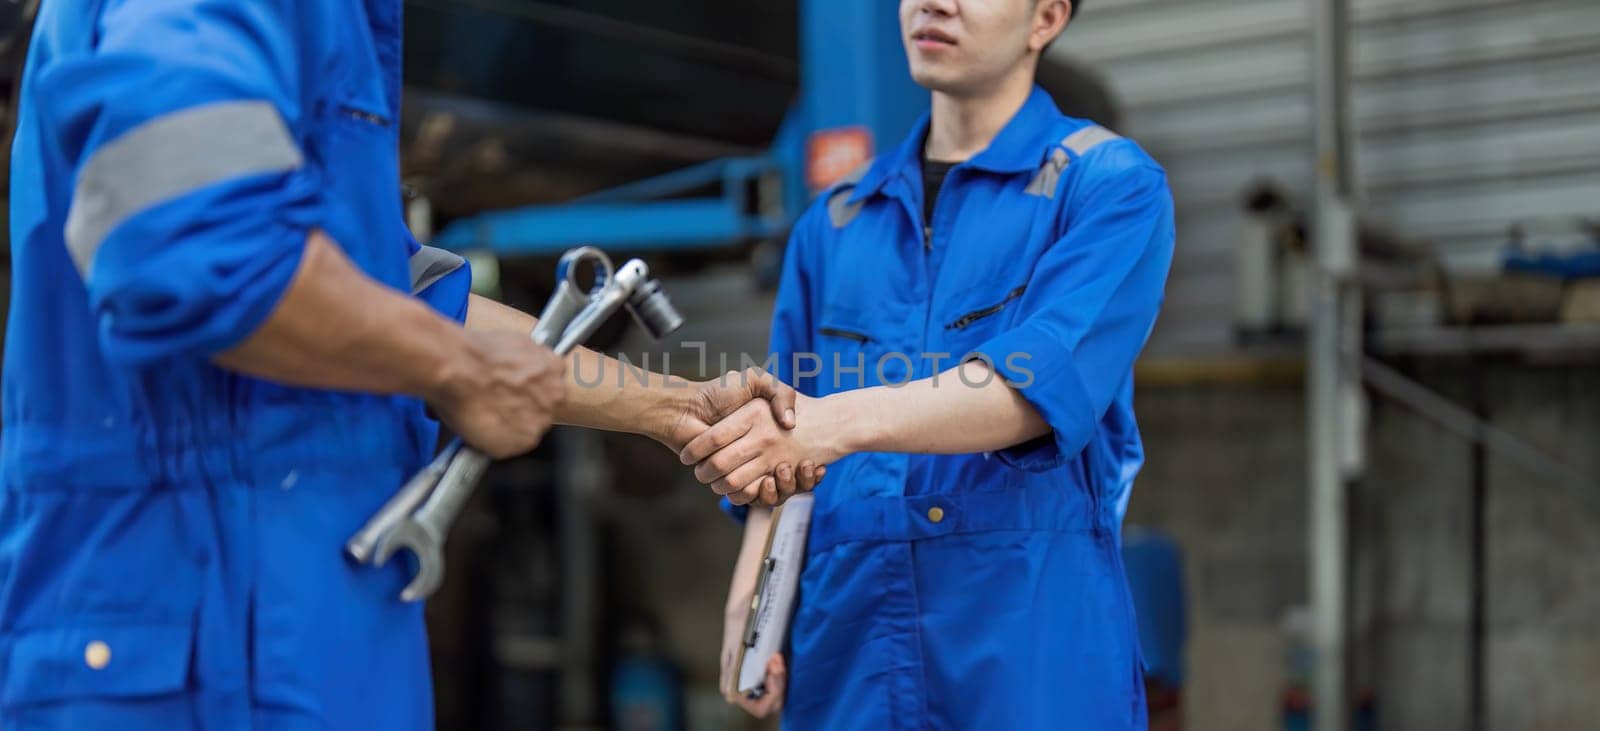 Two car mechanic team shaking hand at automobile service center. Repair service concept. Car repair and maintenance. Car mechanic working at automotive team service center by wichayada